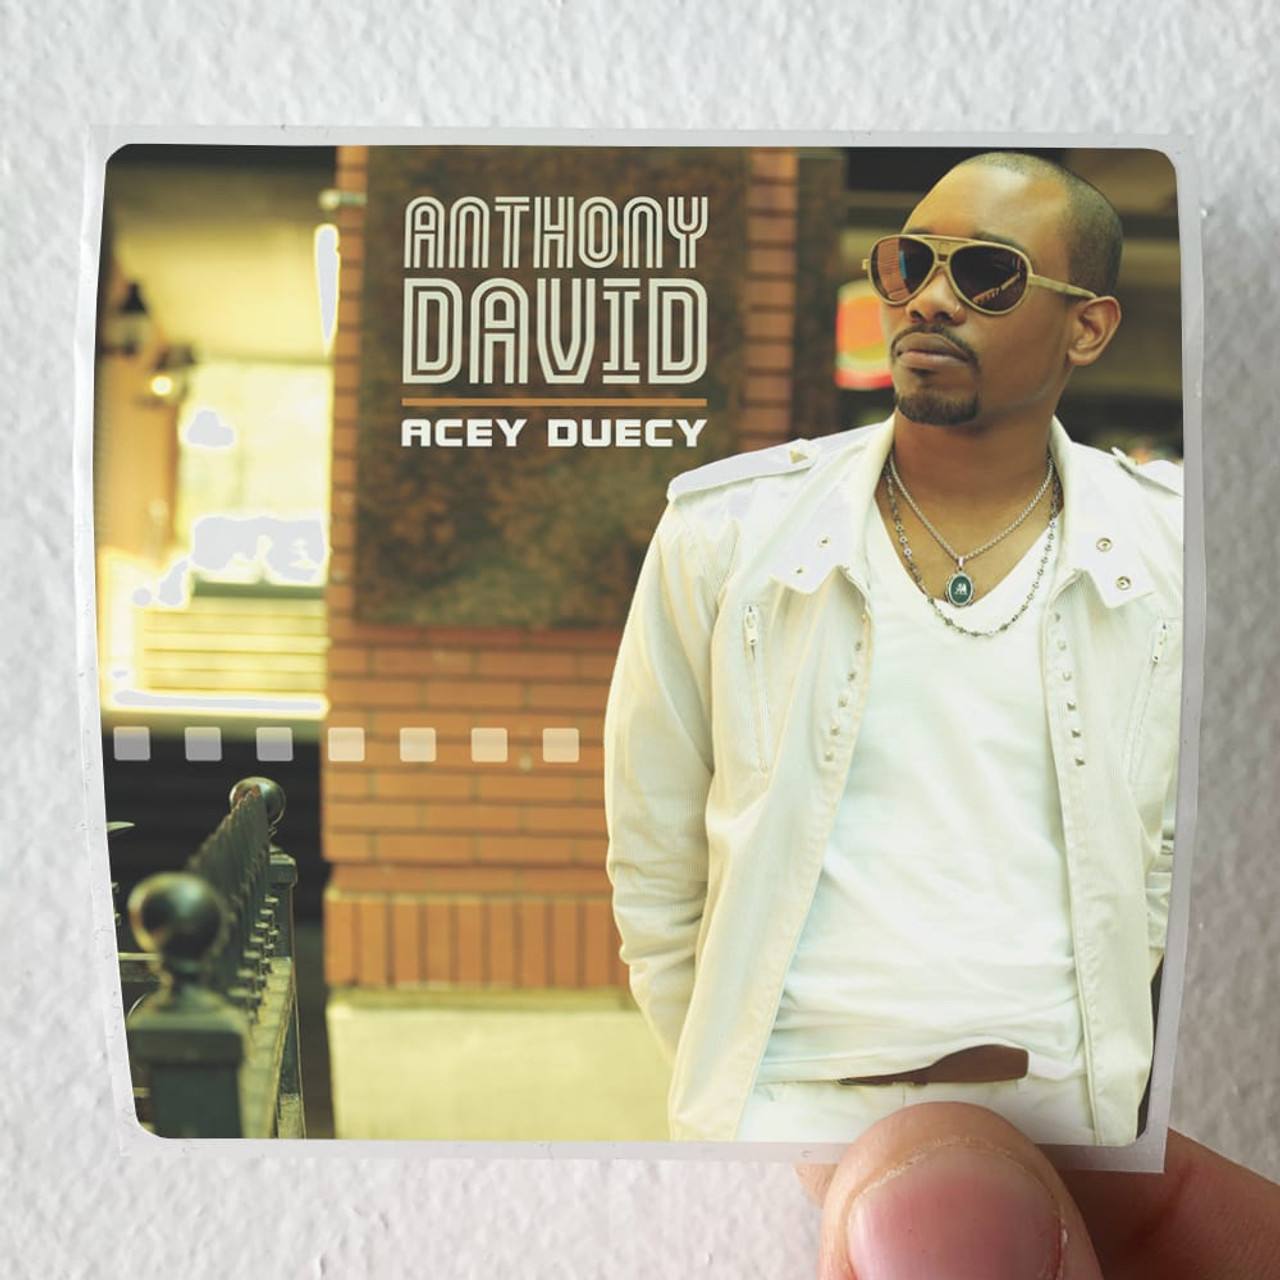 Anthony David Acey Duecy Album Cover Sticker